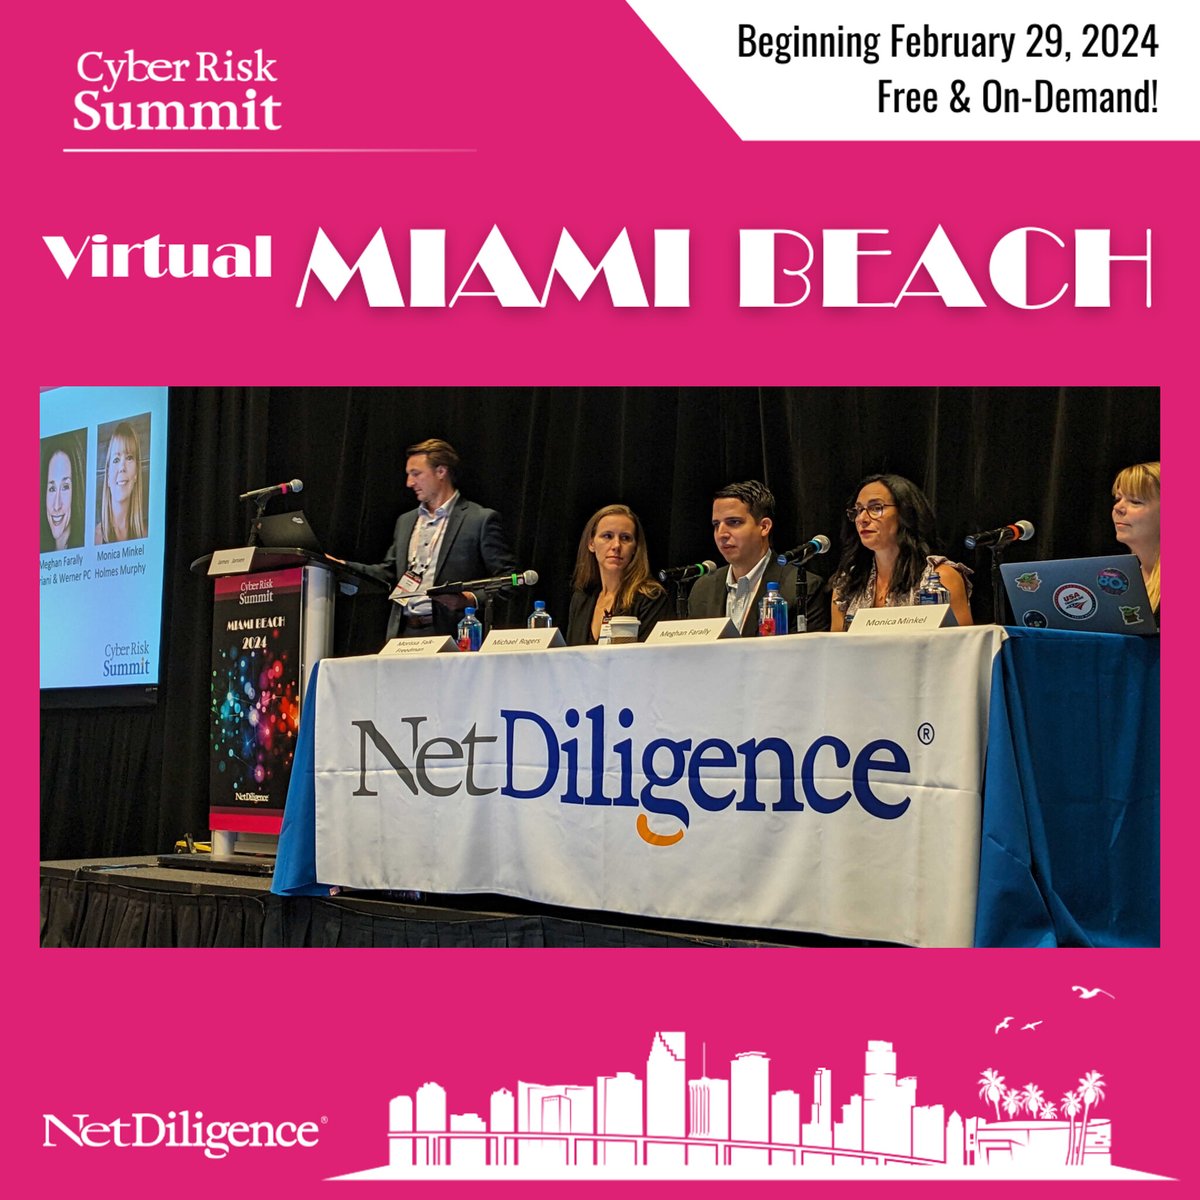 If you missed the Data Transfer Incidents panel at NetDiligence #CyberRiskSummit Miami, you're in luck - it's now available on-demand! bit.ly/42KbHzT